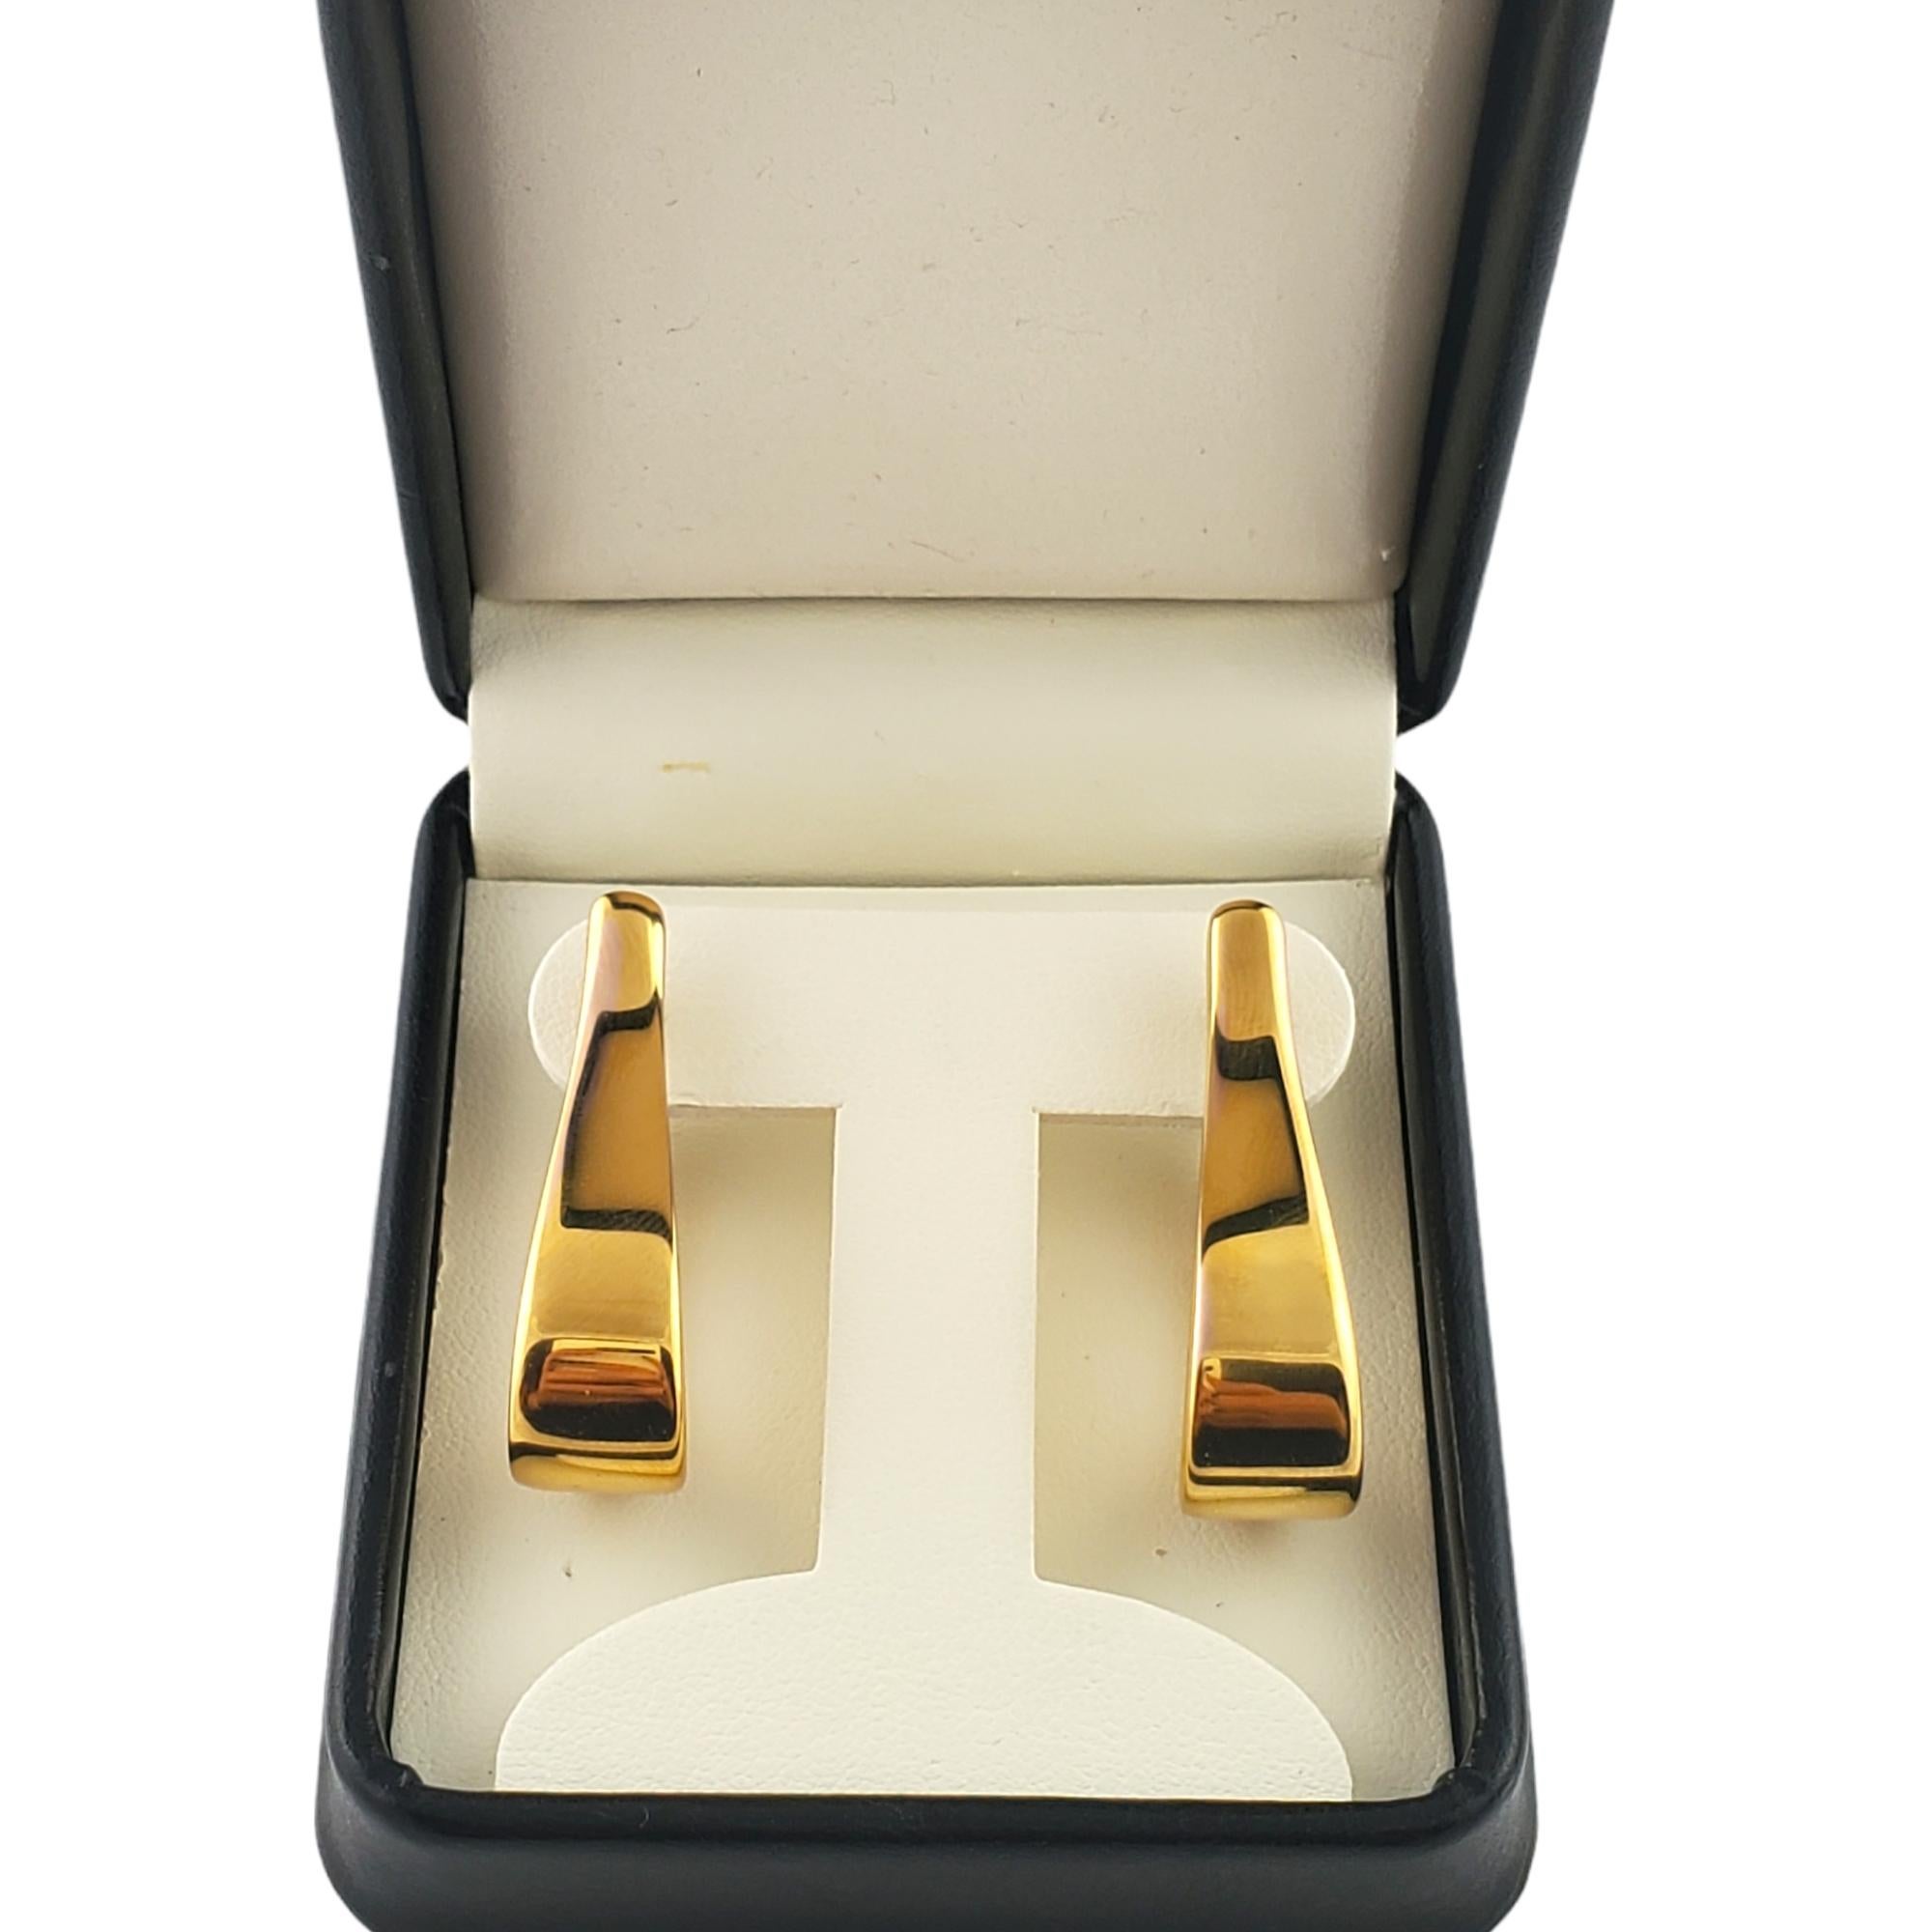 Vintage 14K Yellow Gold Oval Cuff Hoop Earrings

Beautiful set of log oval cuff hoops!

Size: 7 mm X 35 mm X 8.5 mm

Weight: 6.7g/ 4.3 dwt

Hallmark: 14K MILOR ITALY

Very good condition, professionally polished.

Will come packaged in a gift box